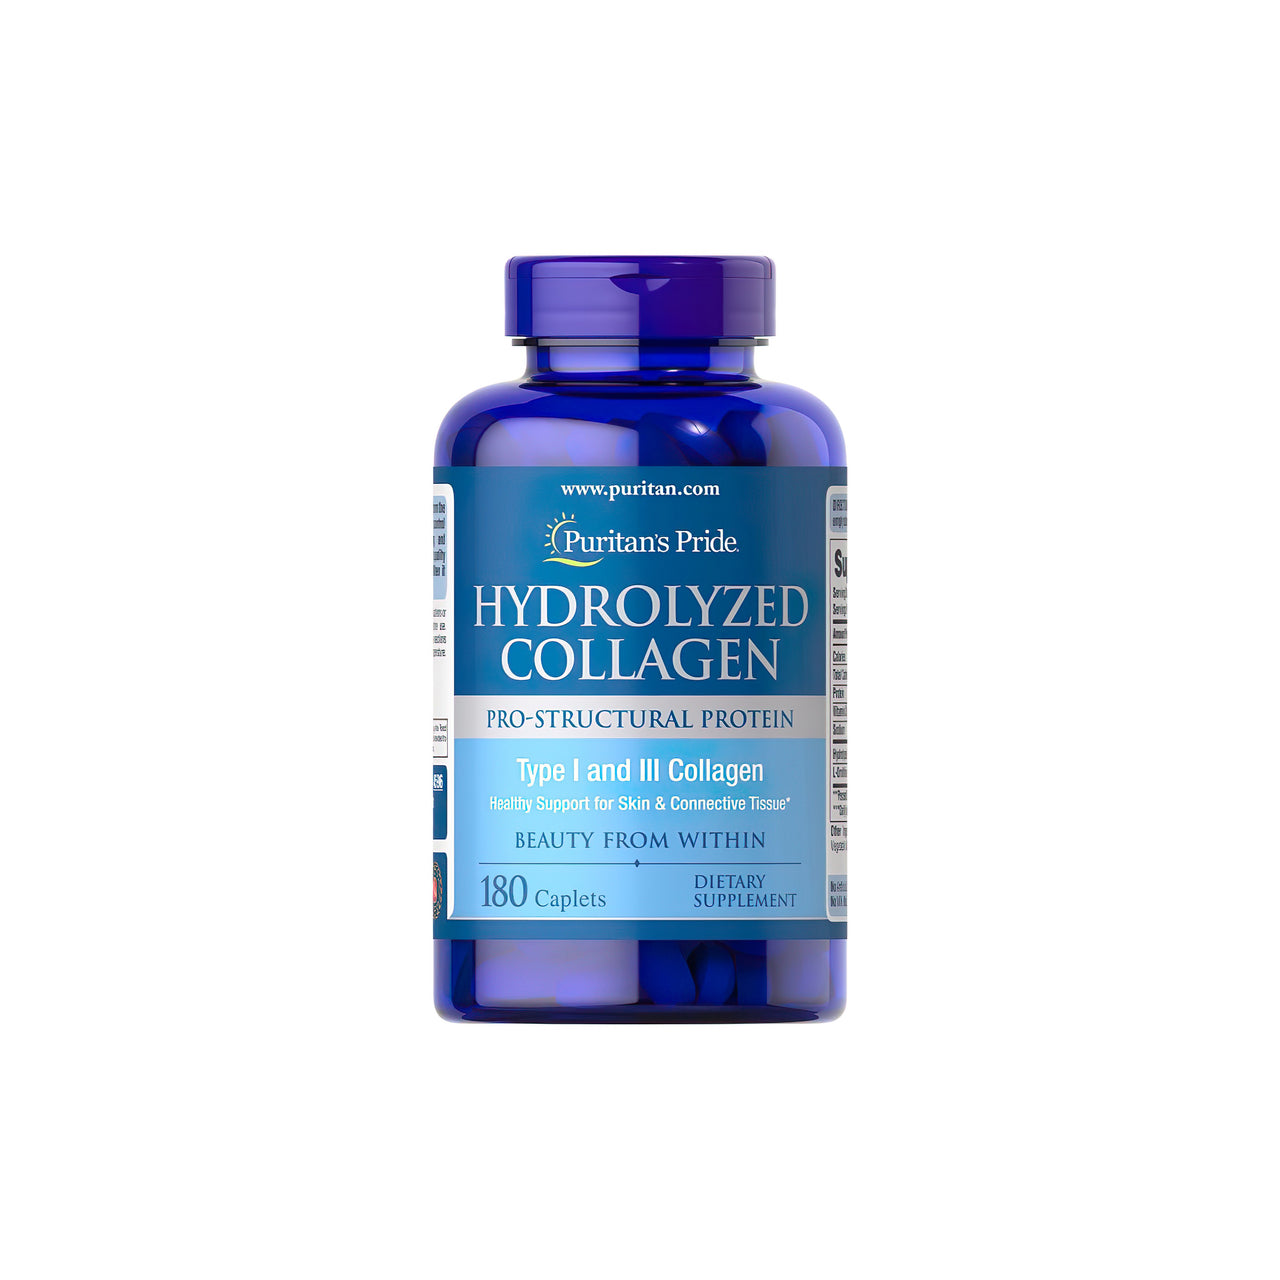 A bottle of Hydrolyzed Collagen 1000 mg 180 caplets from Puritan's Pride.